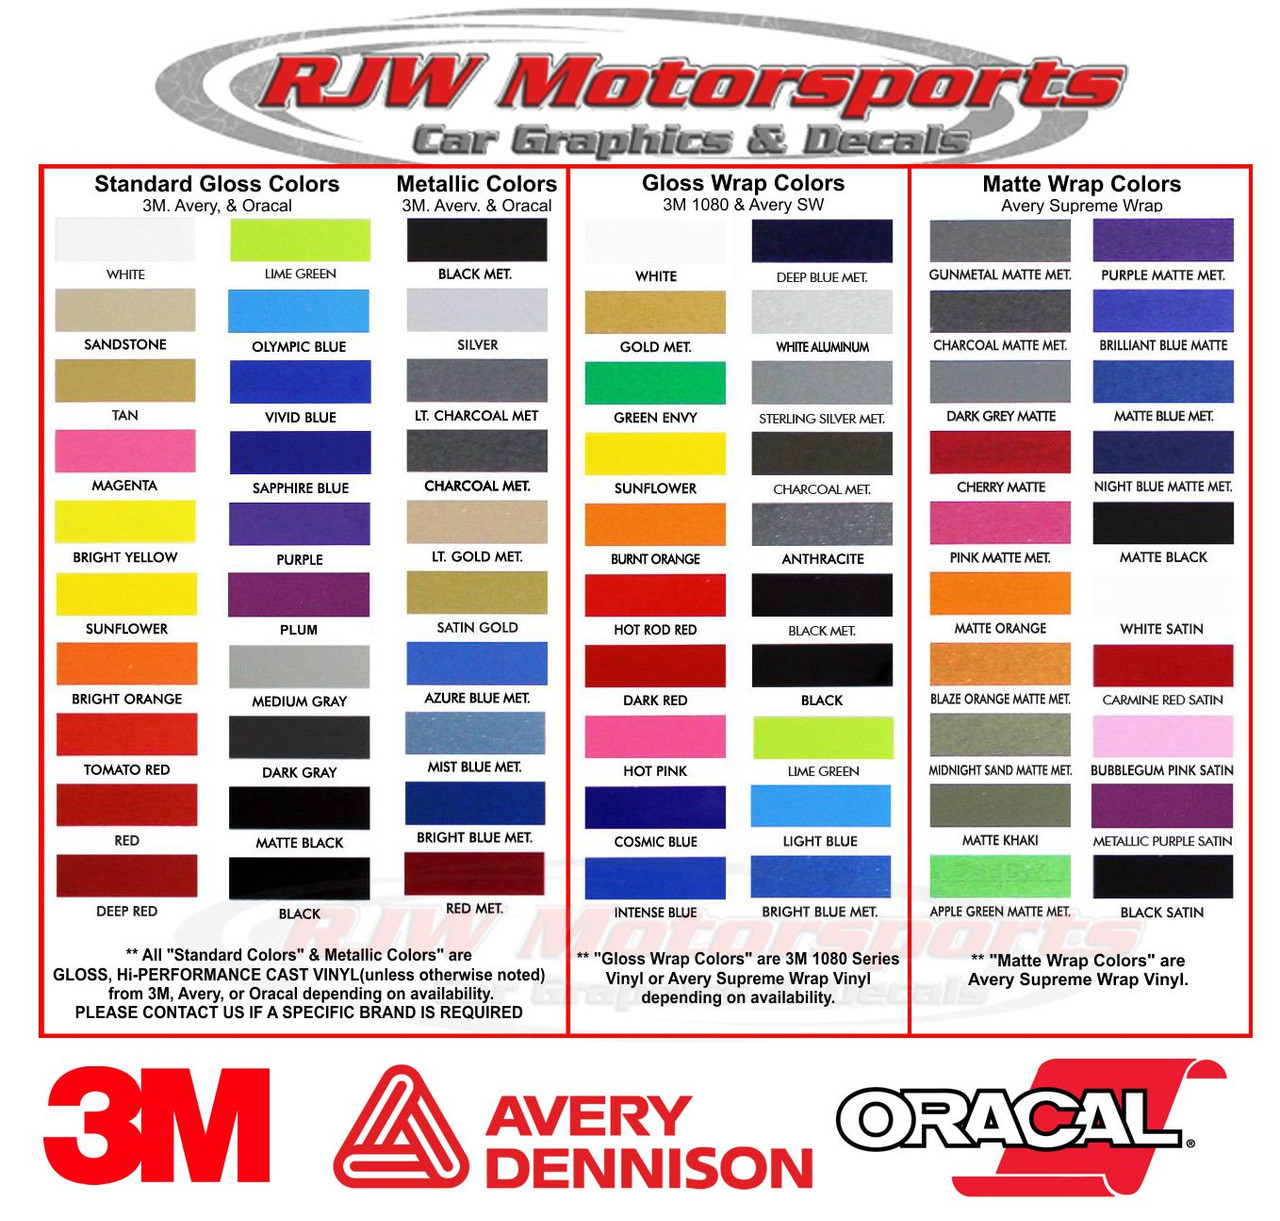 Draft Decal Kit for Ford Fiesta